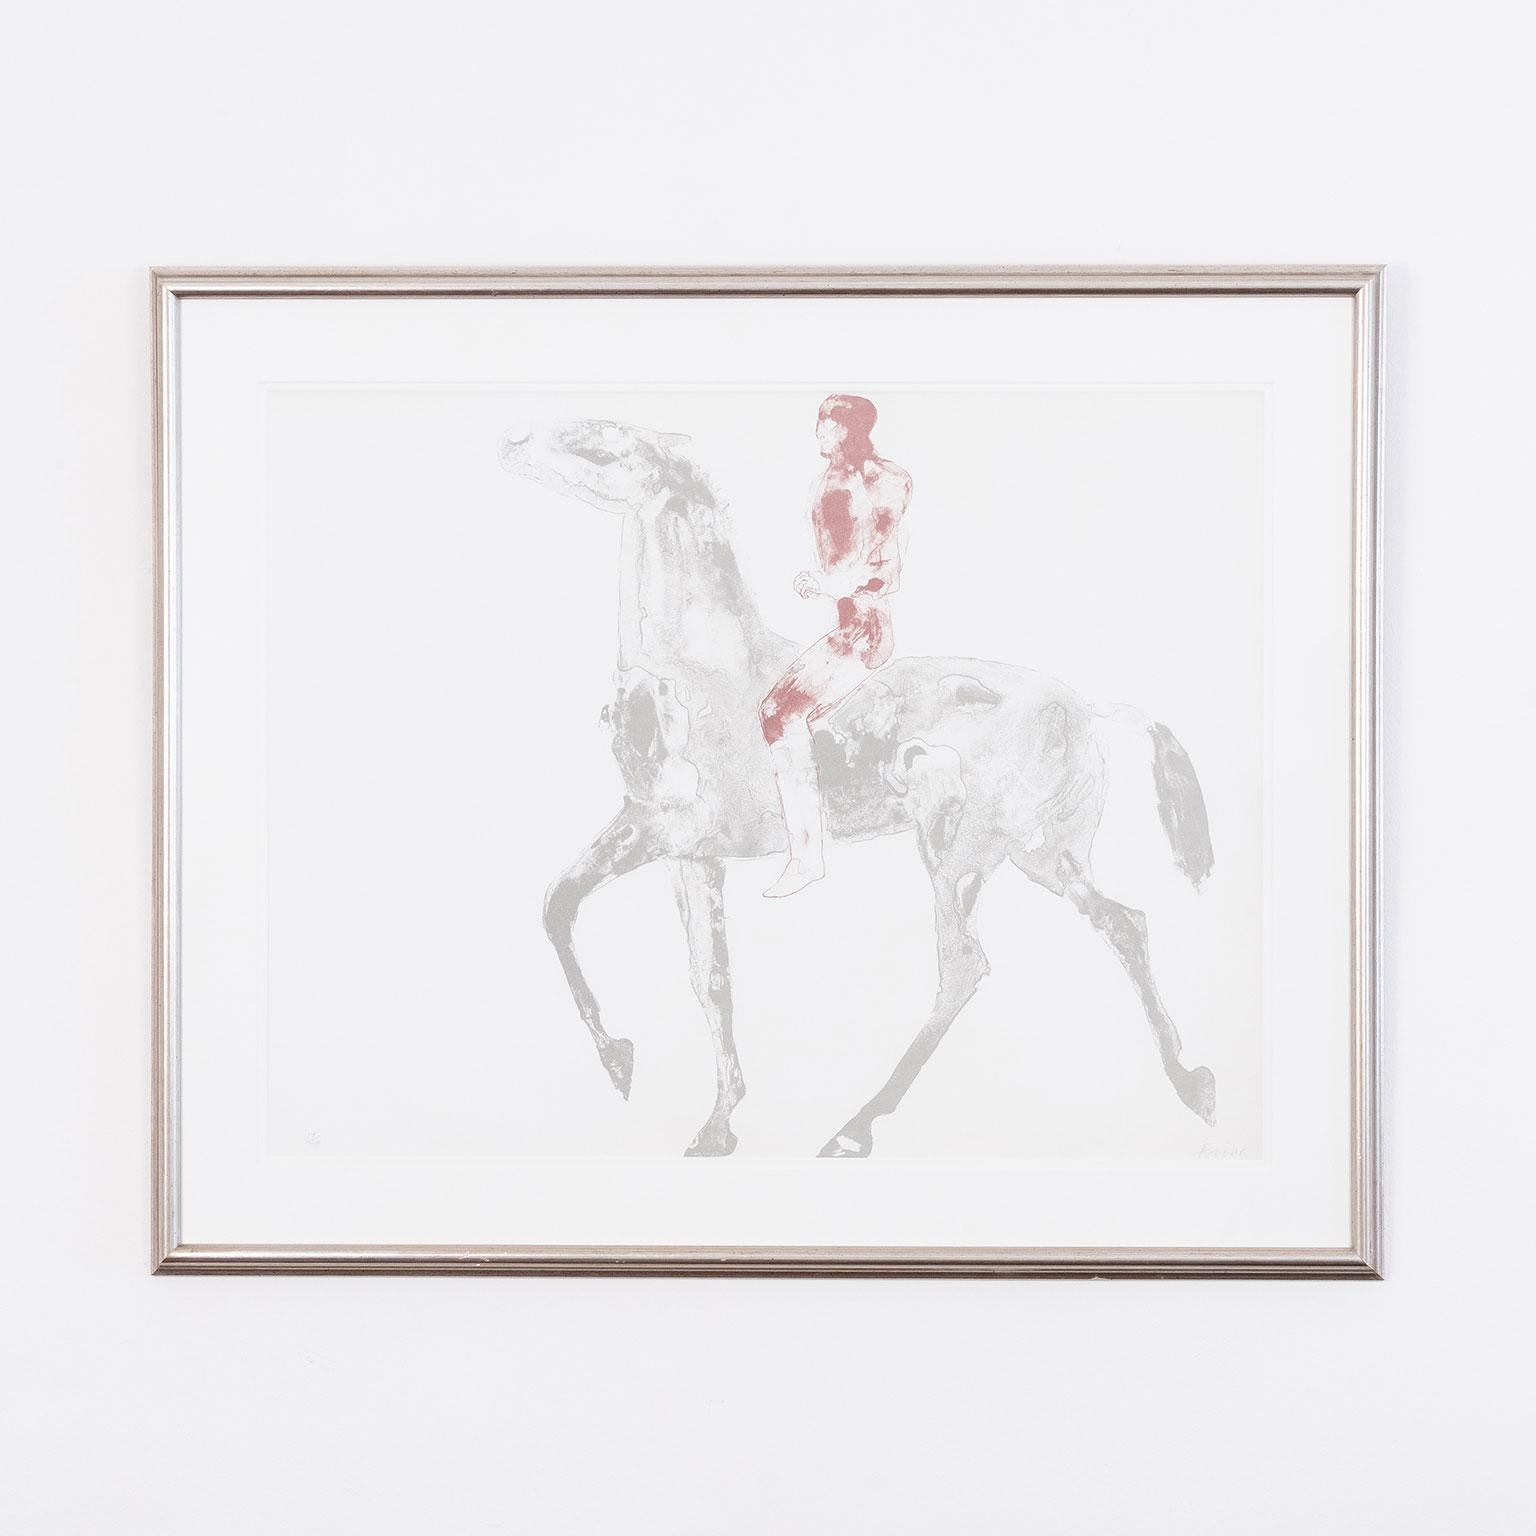 "Horse and Rider I"   1970  Lithograph  Signed and numbered by artist